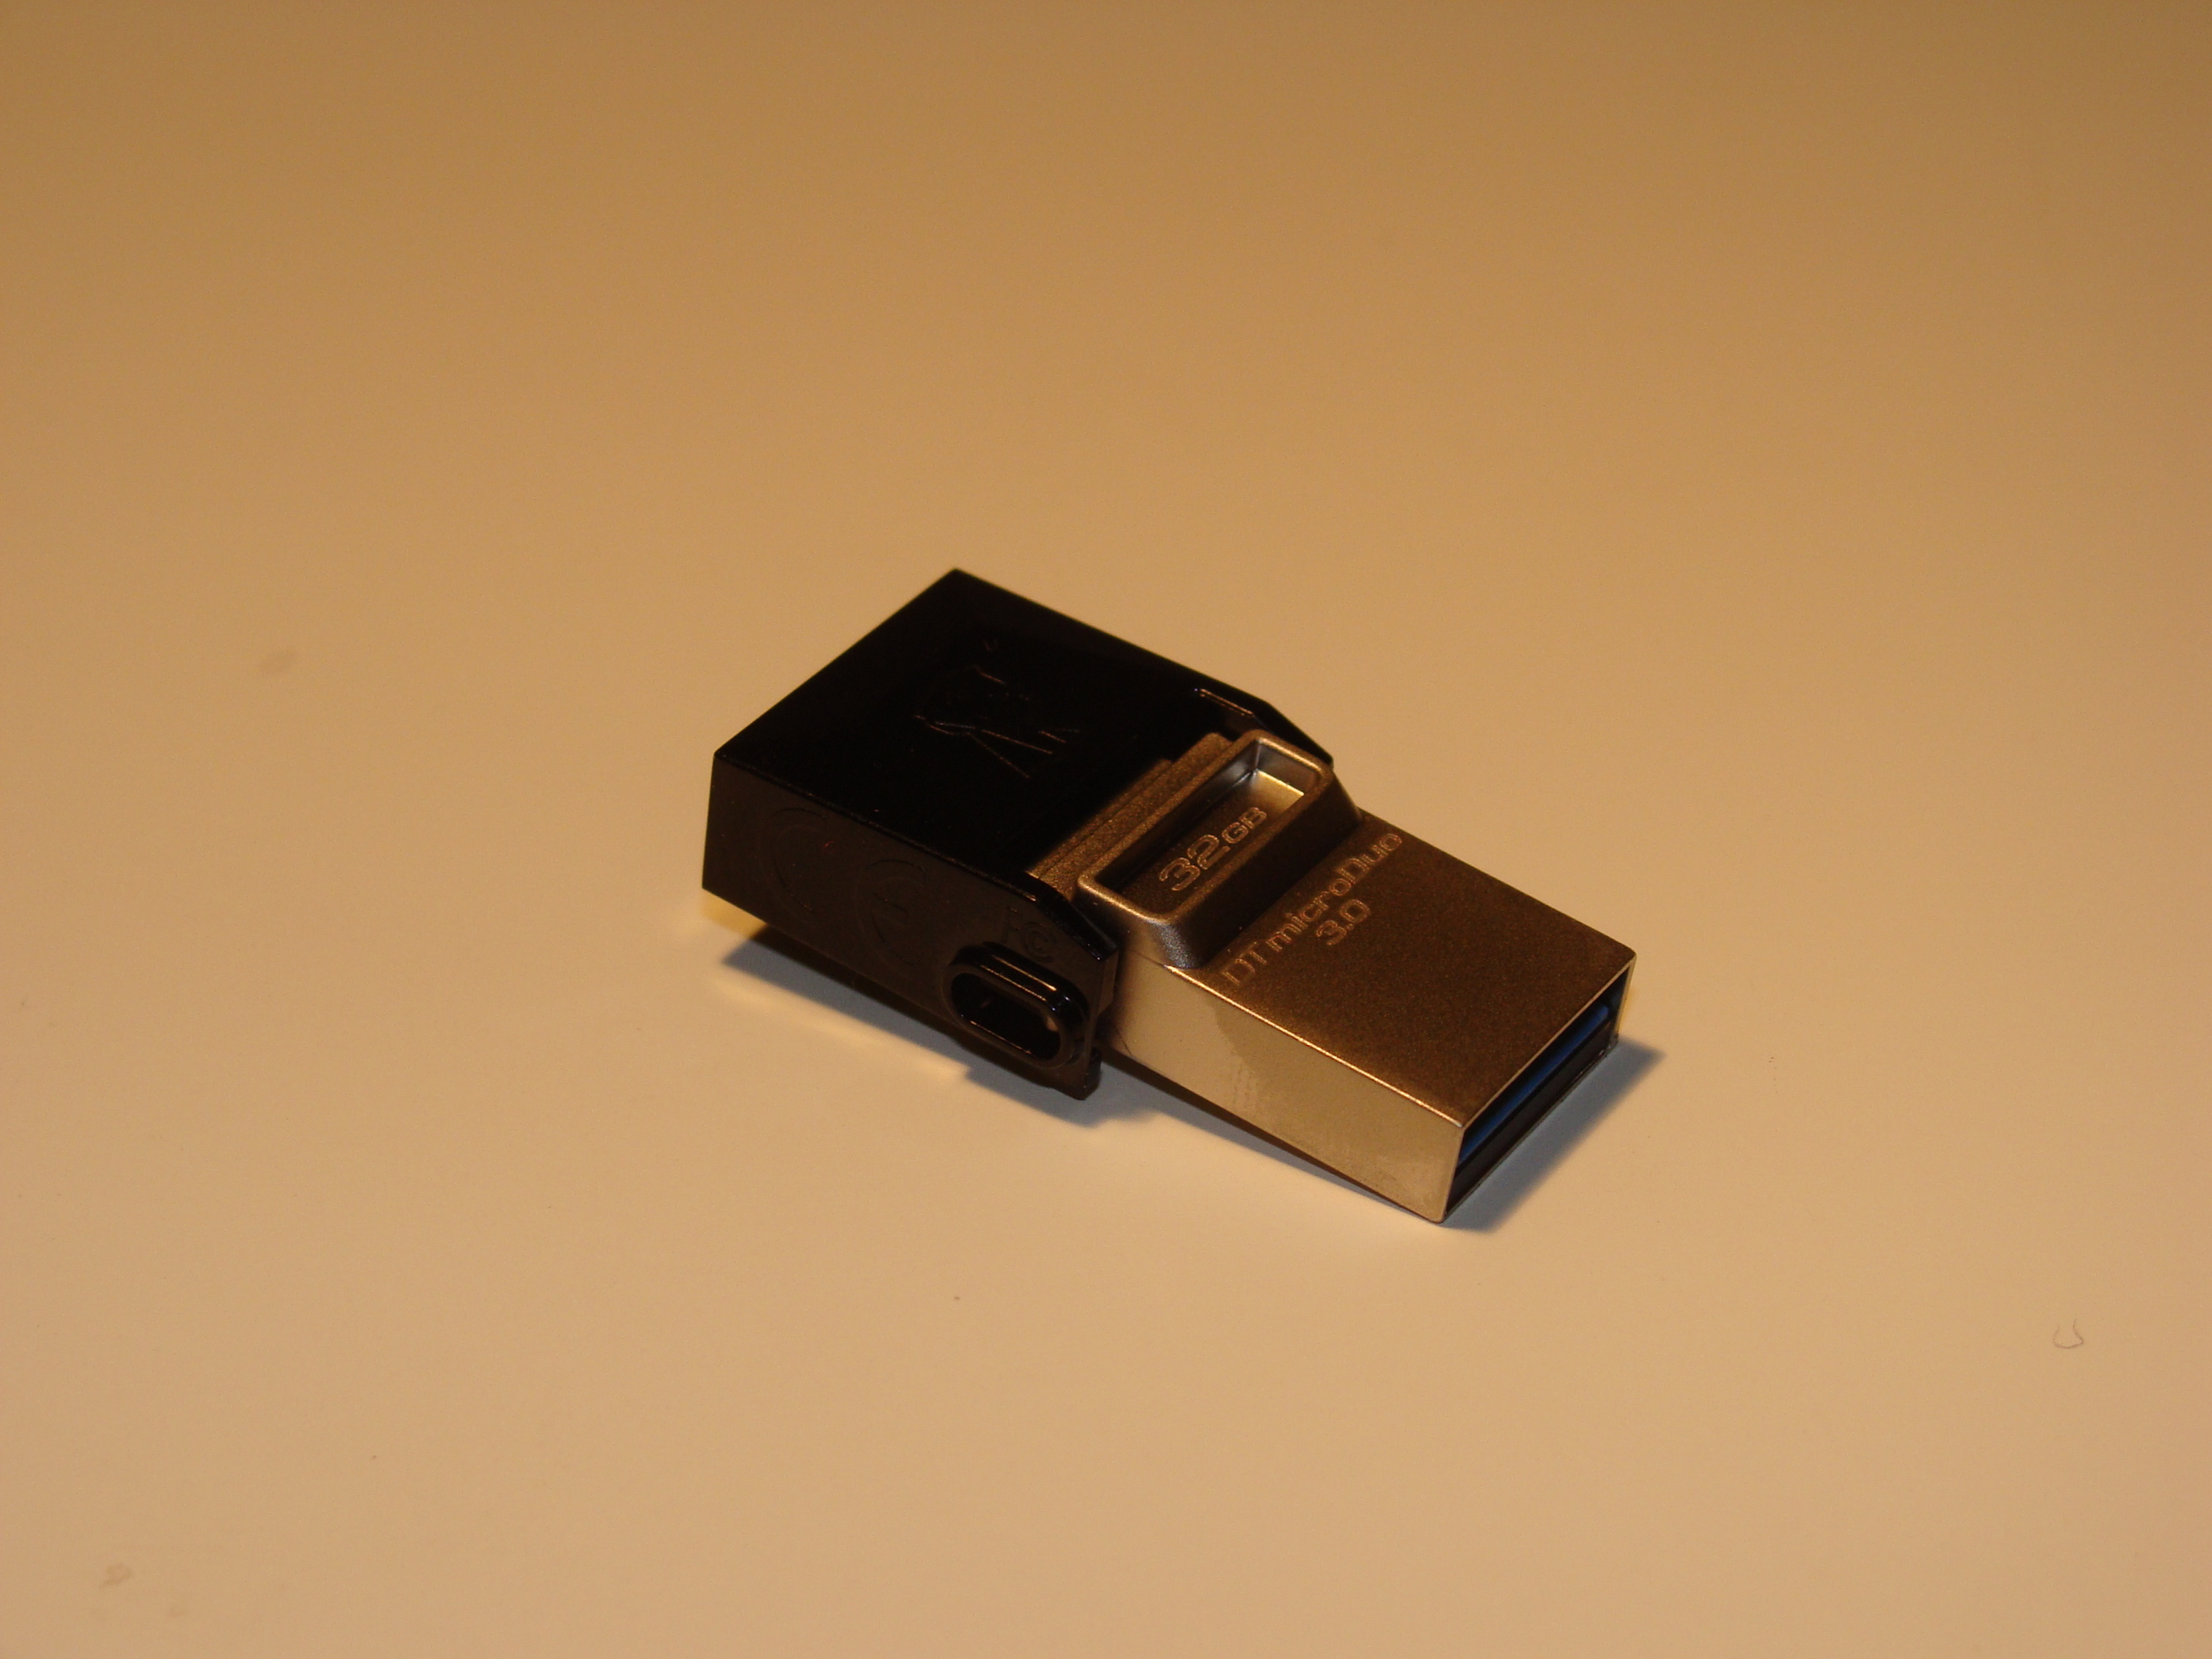  On one end is a standard full sized USB connector 